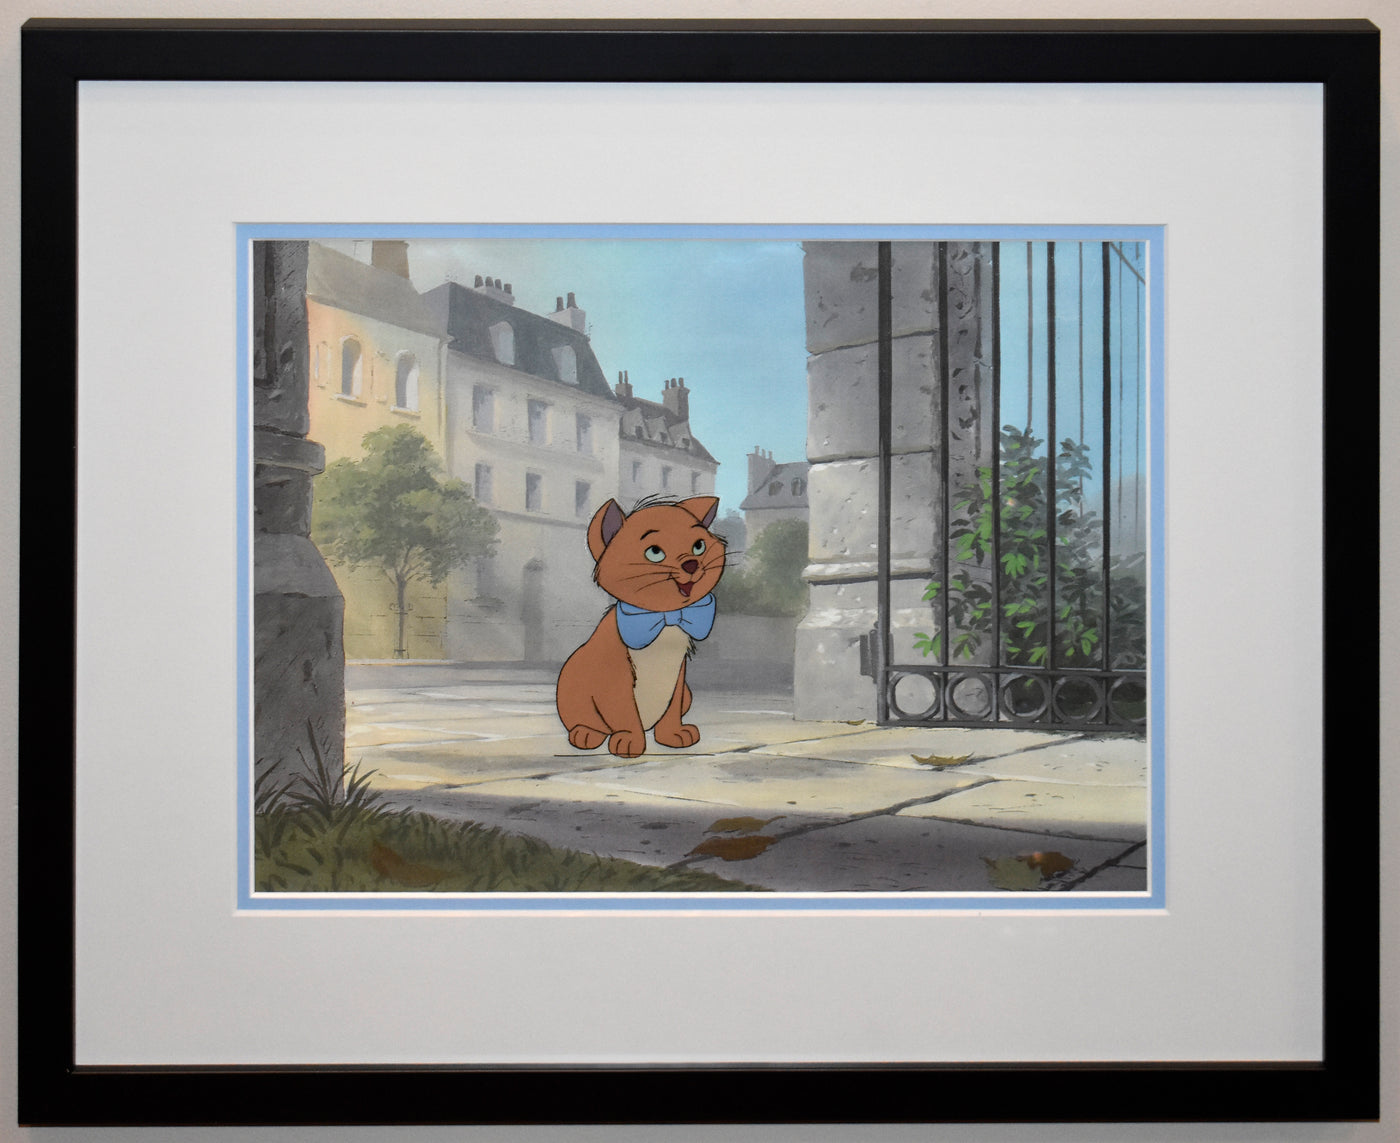 Original Walt Disney Production Cel from The Aristocats featuring Toulouse